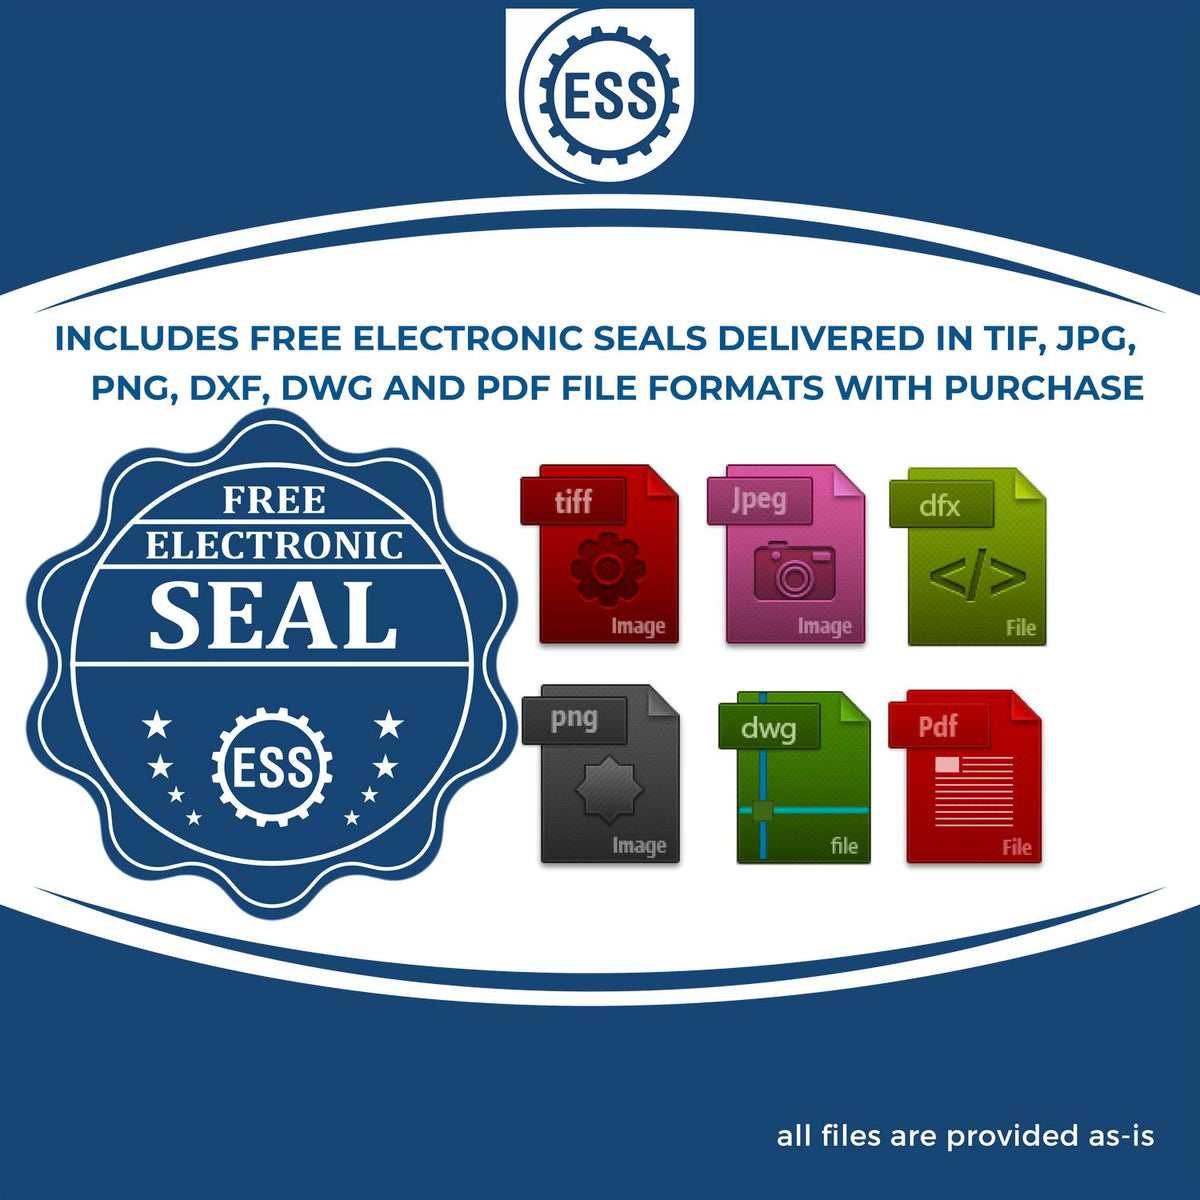 An infographic for the free electronic seal for the West Virginia Geologist Desk Seal illustrating the different file type icons such as DXF, DWG, TIF, JPG and PNG.